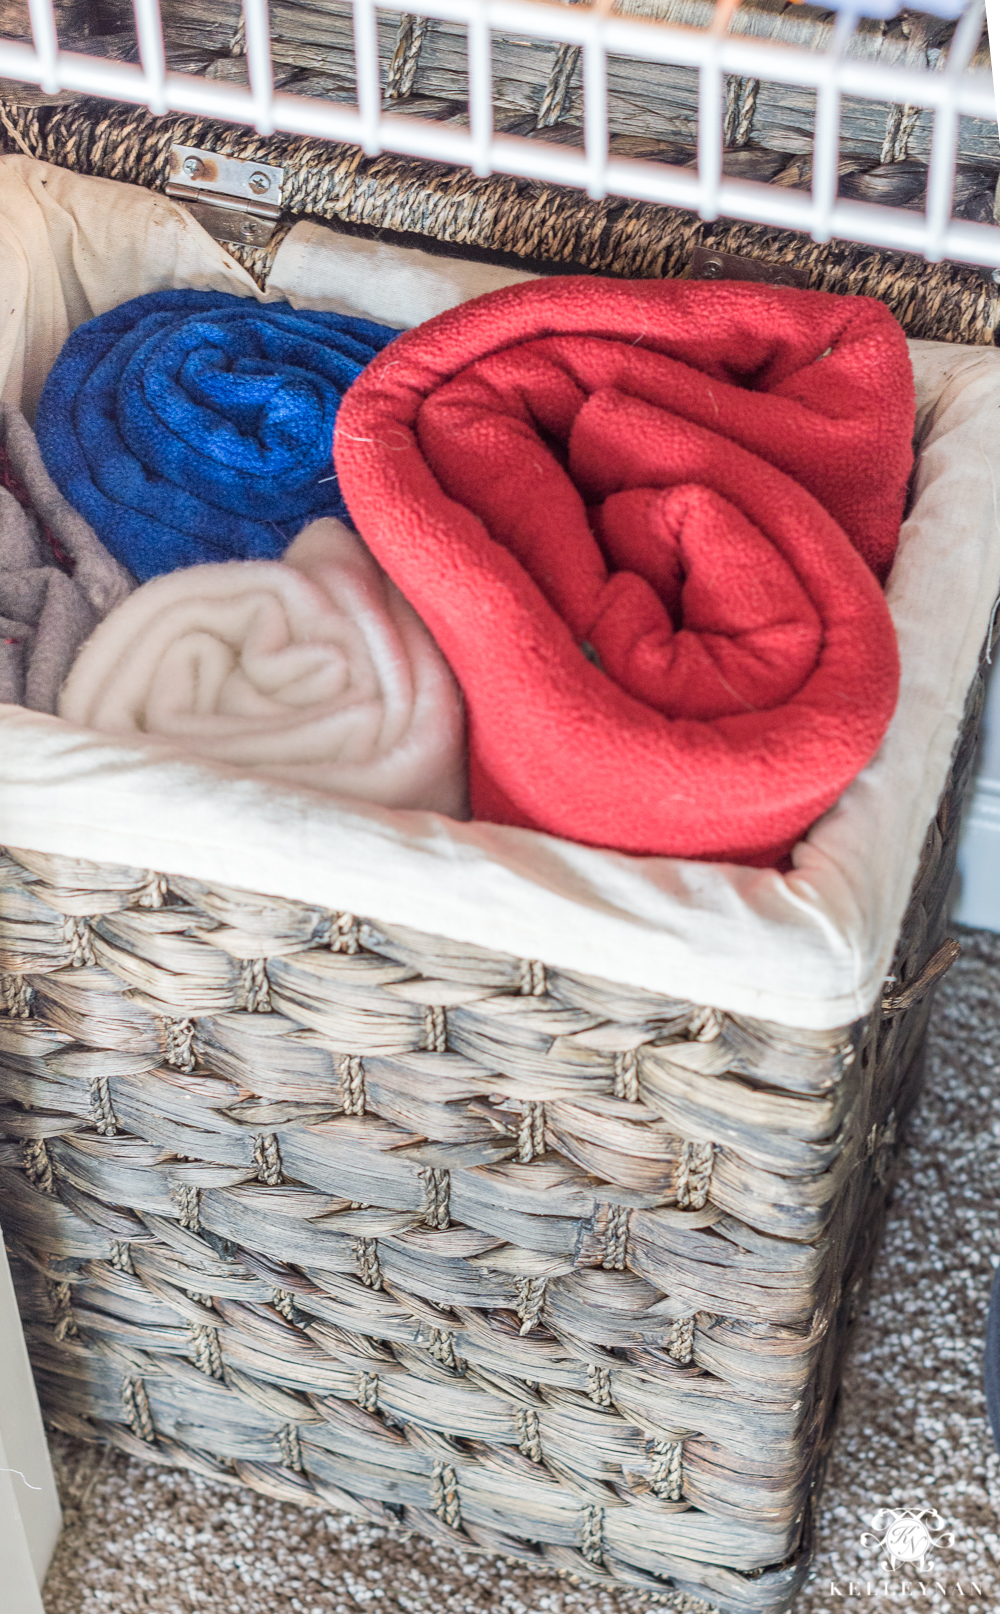 Dog blankets organized in a hamper in the linen closet